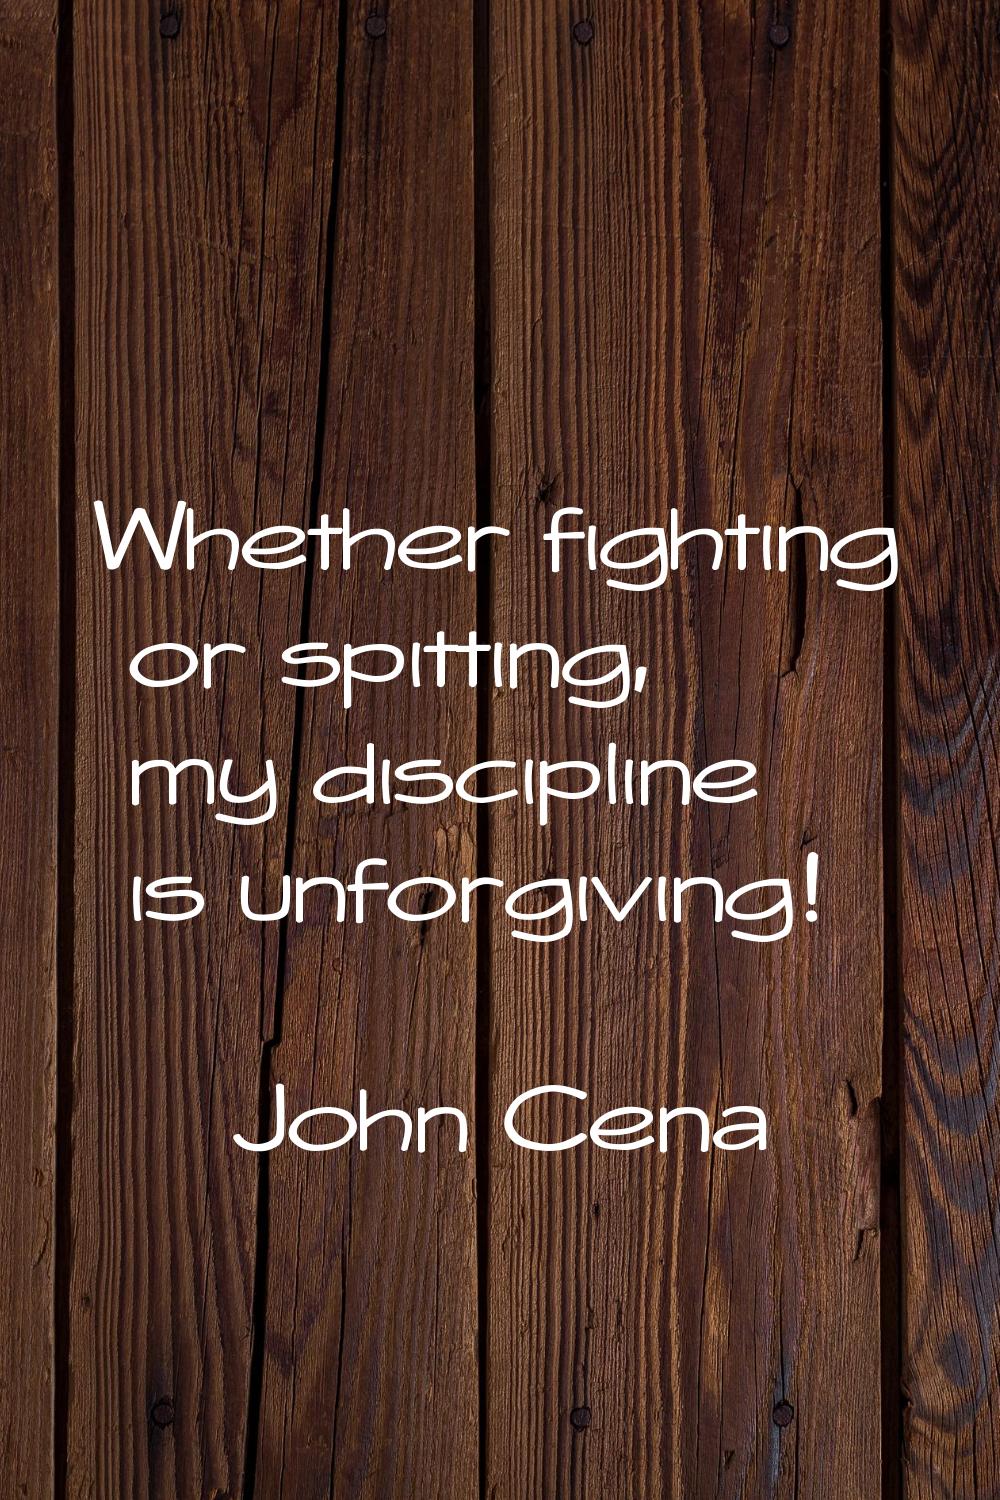 Whether fighting or spitting, my discipline is unforgiving!